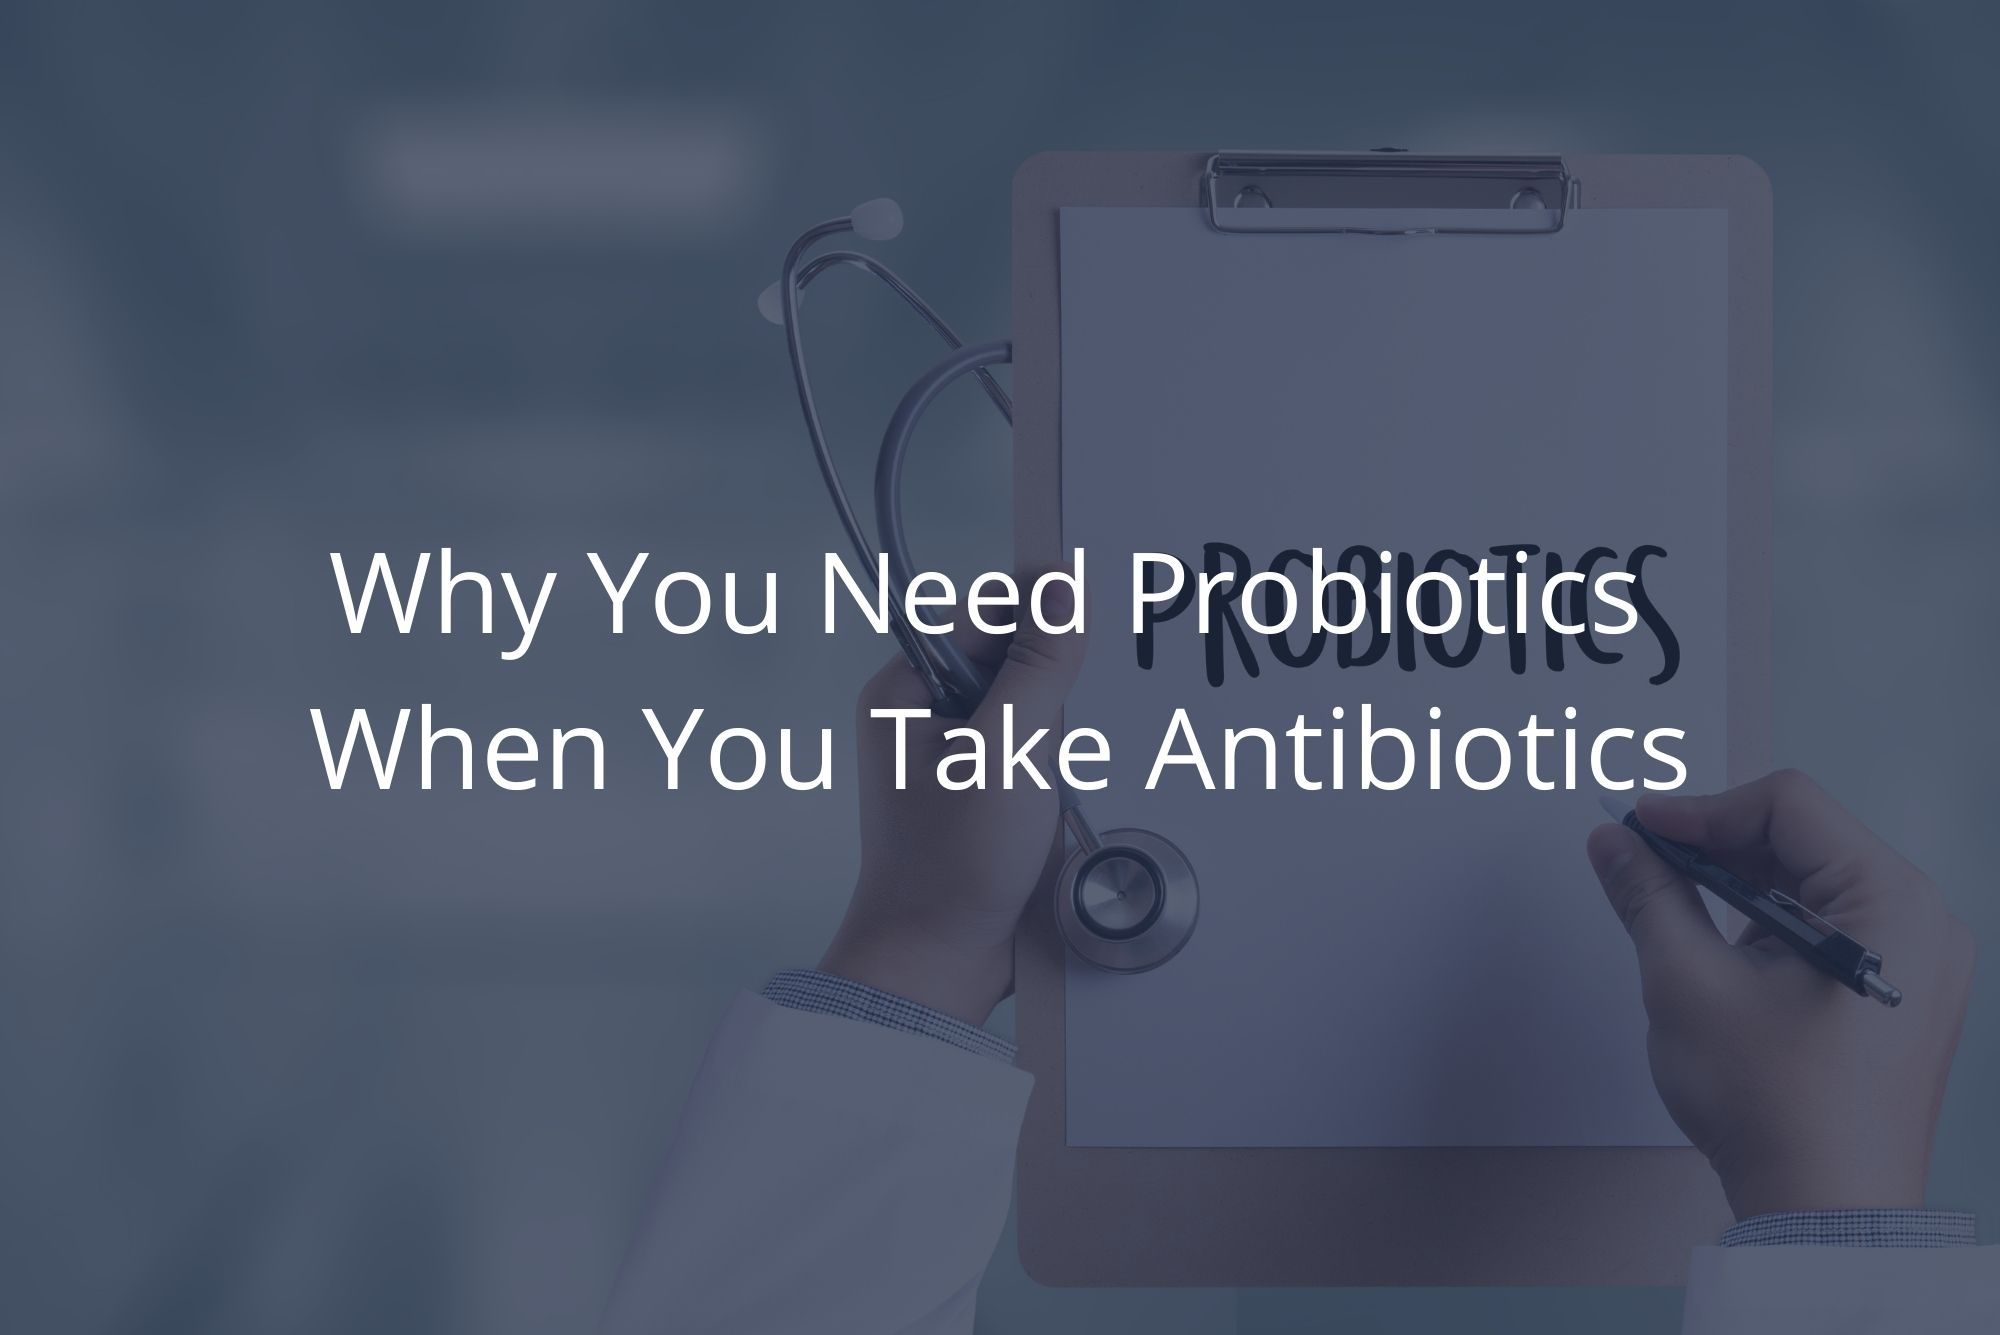 A physician holding a clipboard writes on a piece of paper to tell a patient that they can take probiotics with antibiotics.